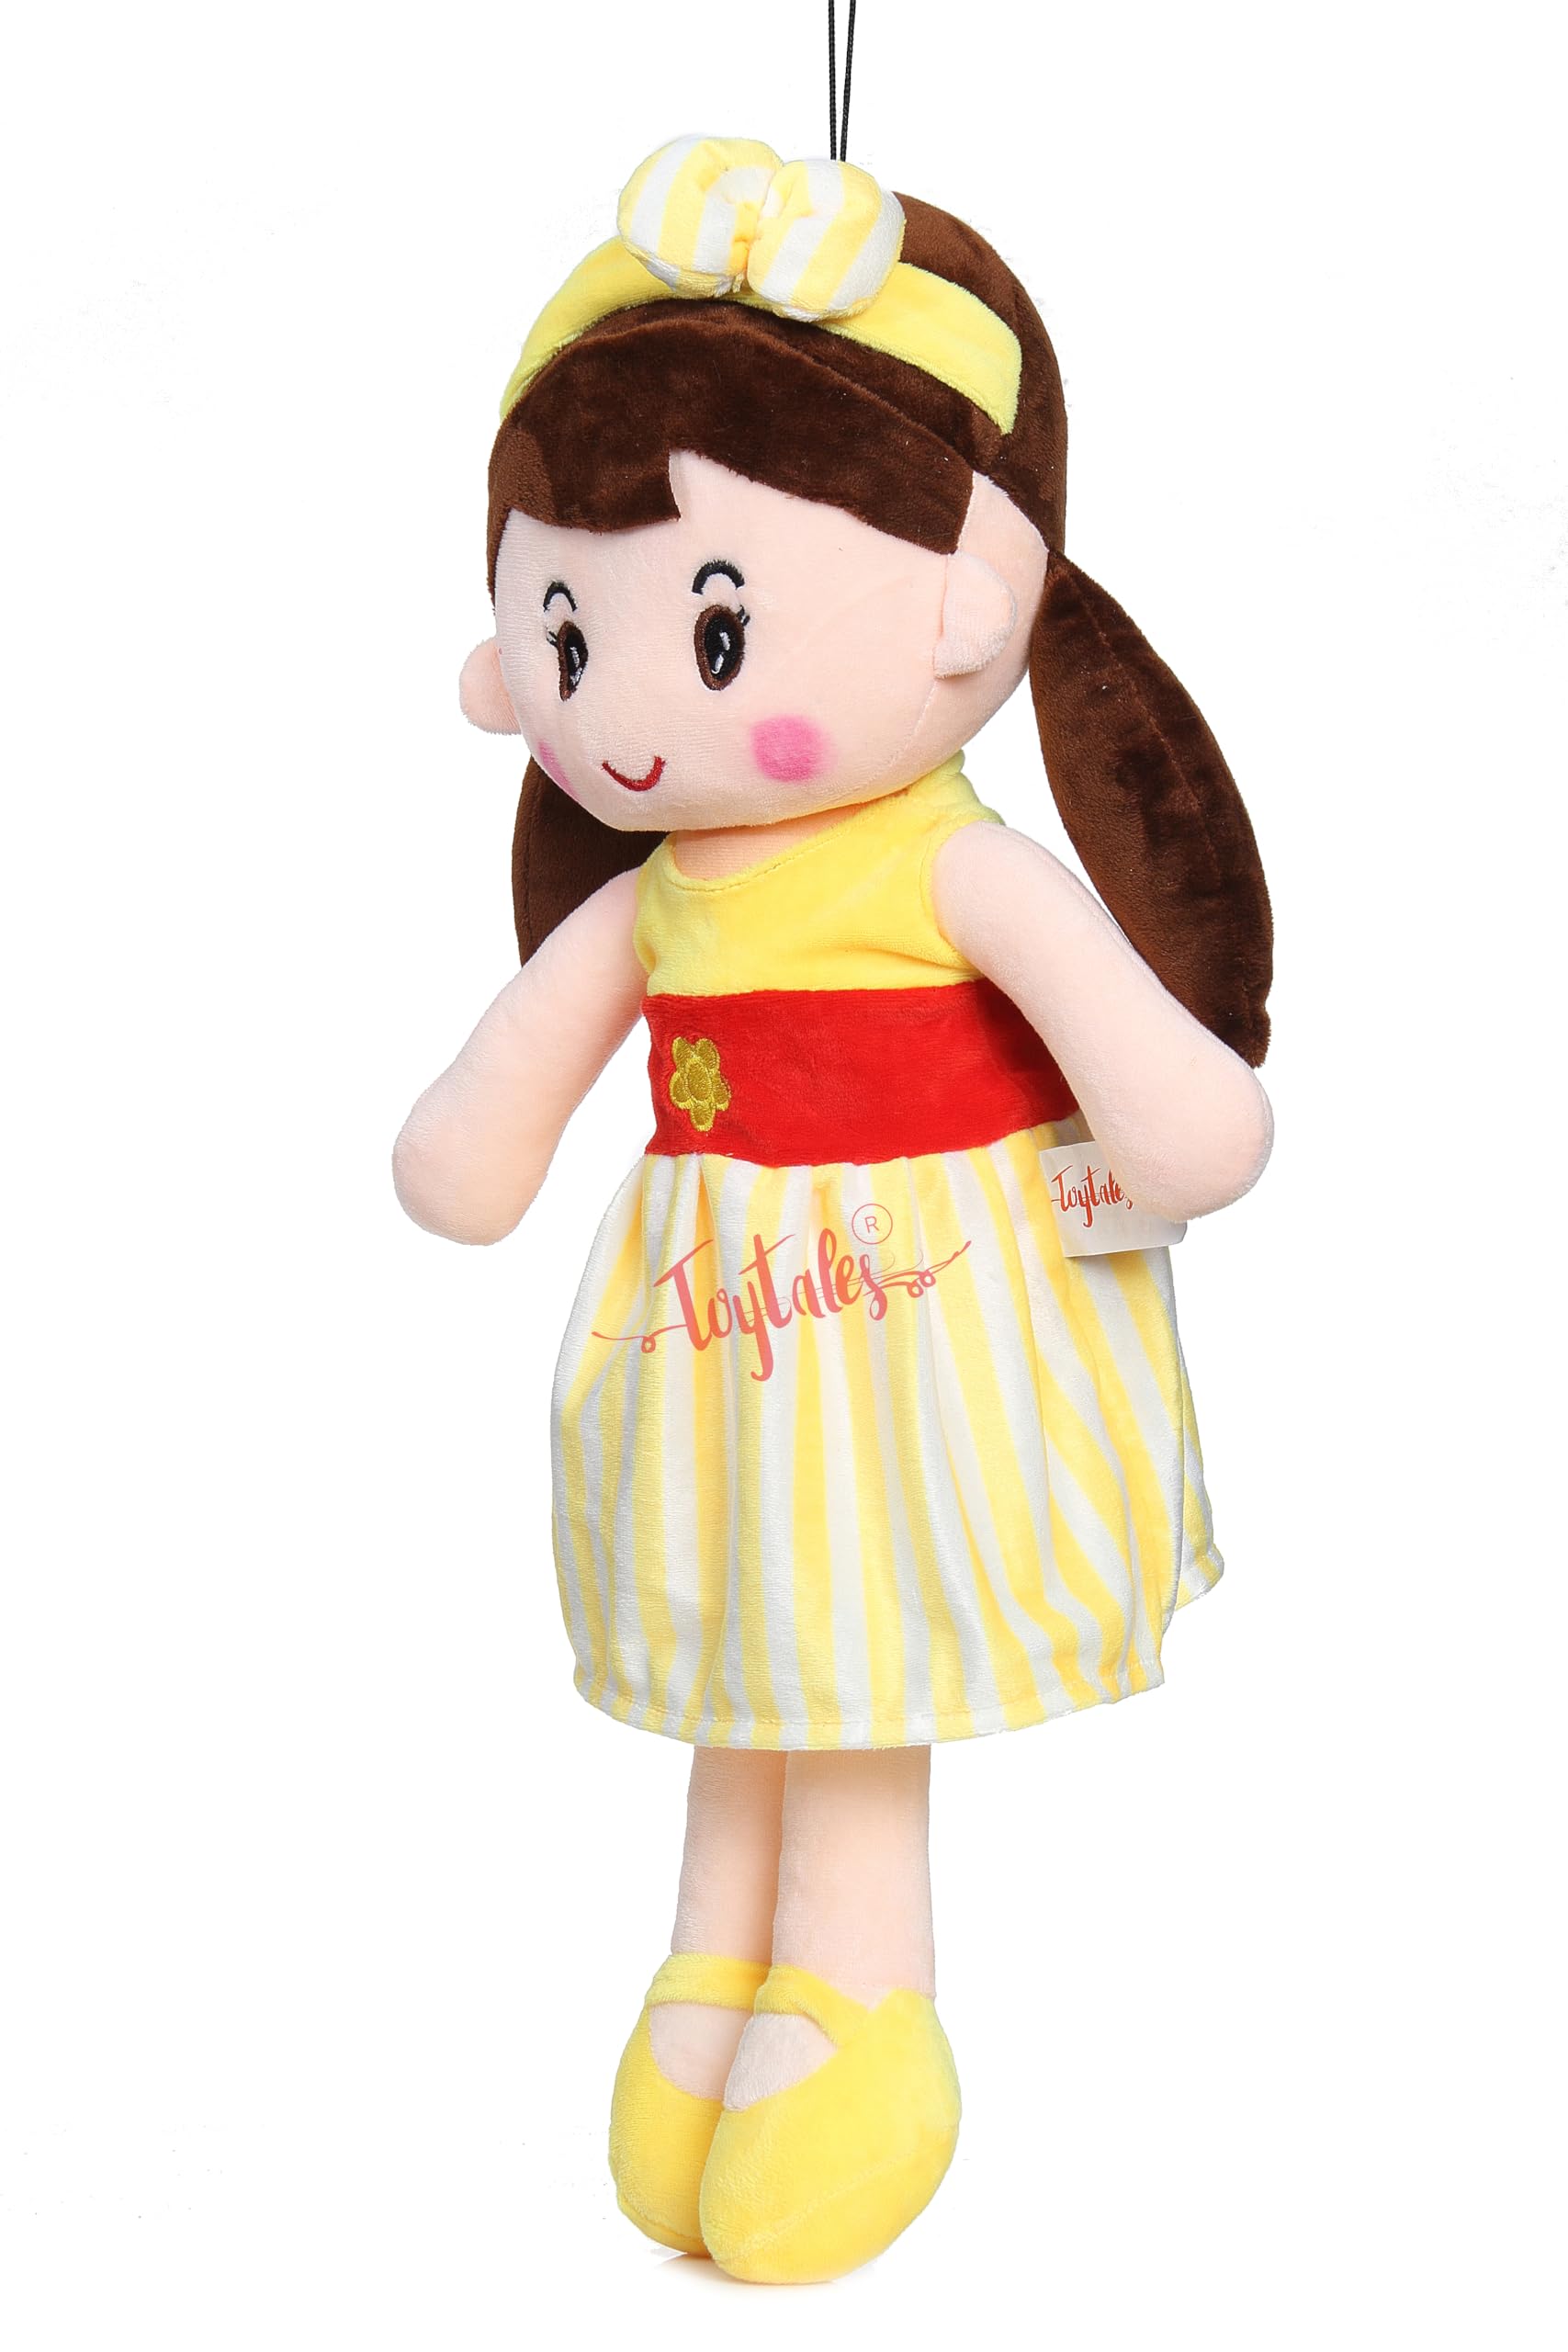 Cute Super Soft Stuffed Doll Medium Size 60cm, Cuddly Squishy Dolls, Plush Toy for Baby Girls, Spark Imaginative Play, Safe & Fun Gift for Kids, Perfect for Playtime & Cuddling (Yellow)